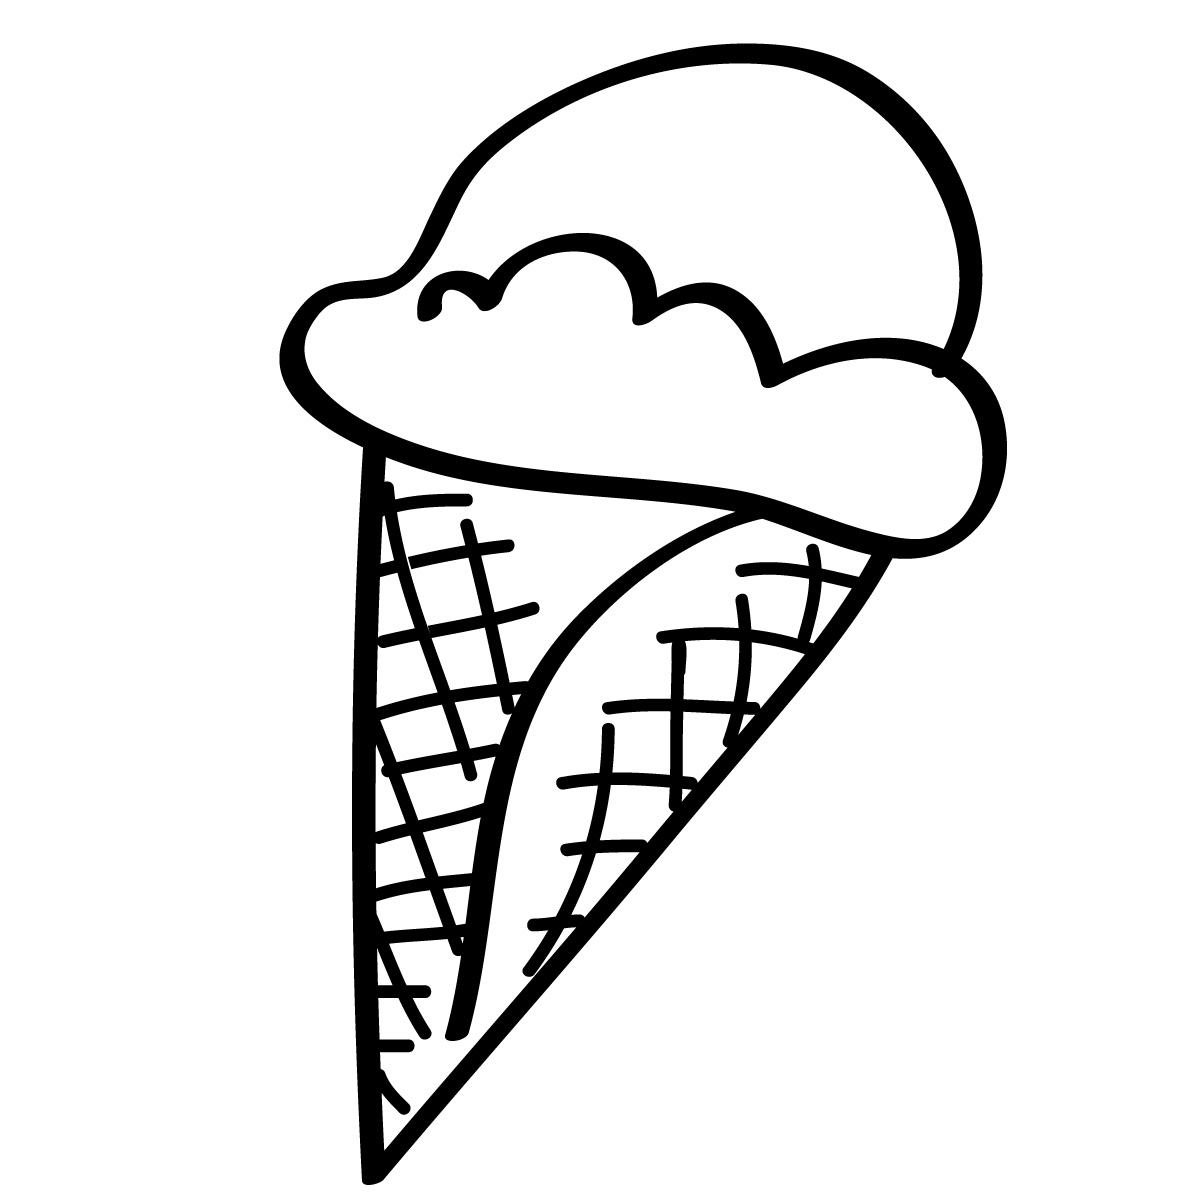 Ice-cream Cone Drawing - ClipArt Best